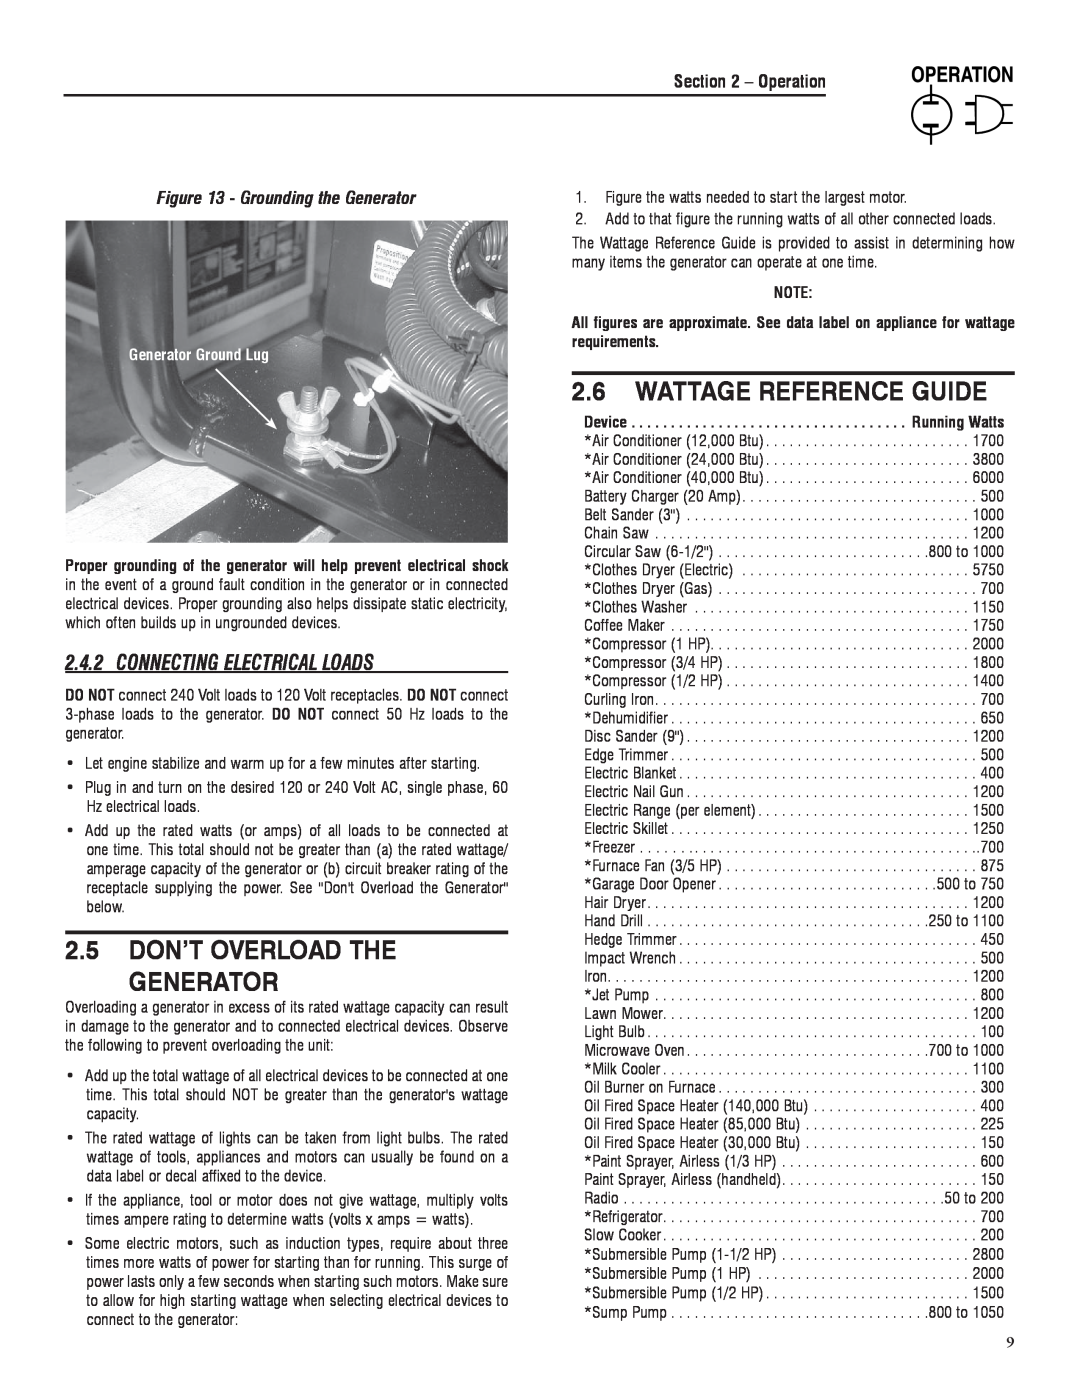 Sears 005734-0, 005735-0 manual 2.5 DON’T OVERLOAD THE GENERATOR, Wattage Reference Guide, Connecting Electrical Loads 